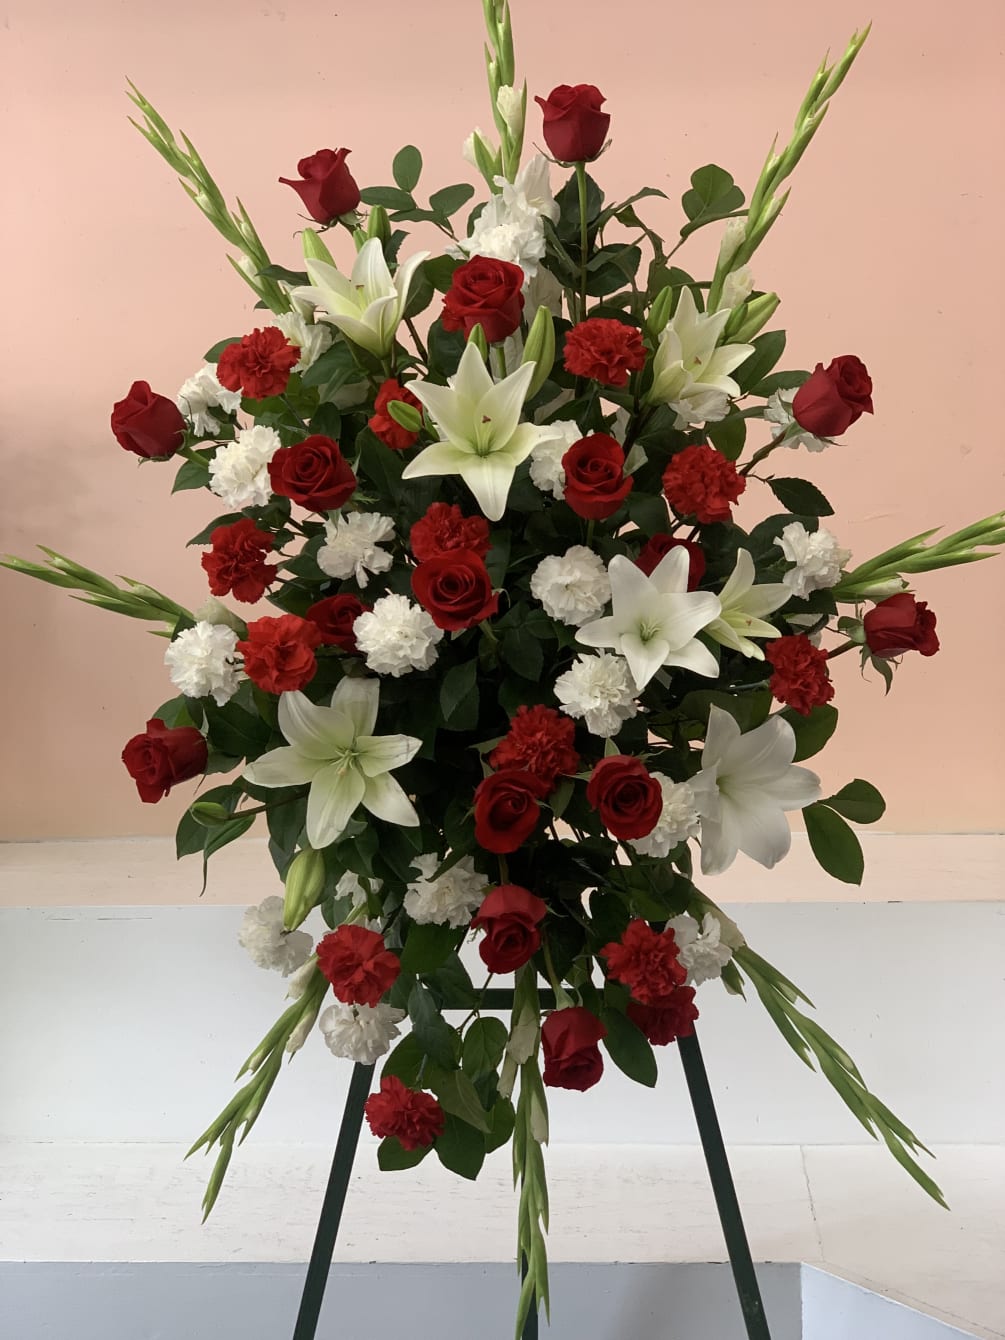 This is a beautiful flower arrangement for funeral service that&rsquo;s sure to